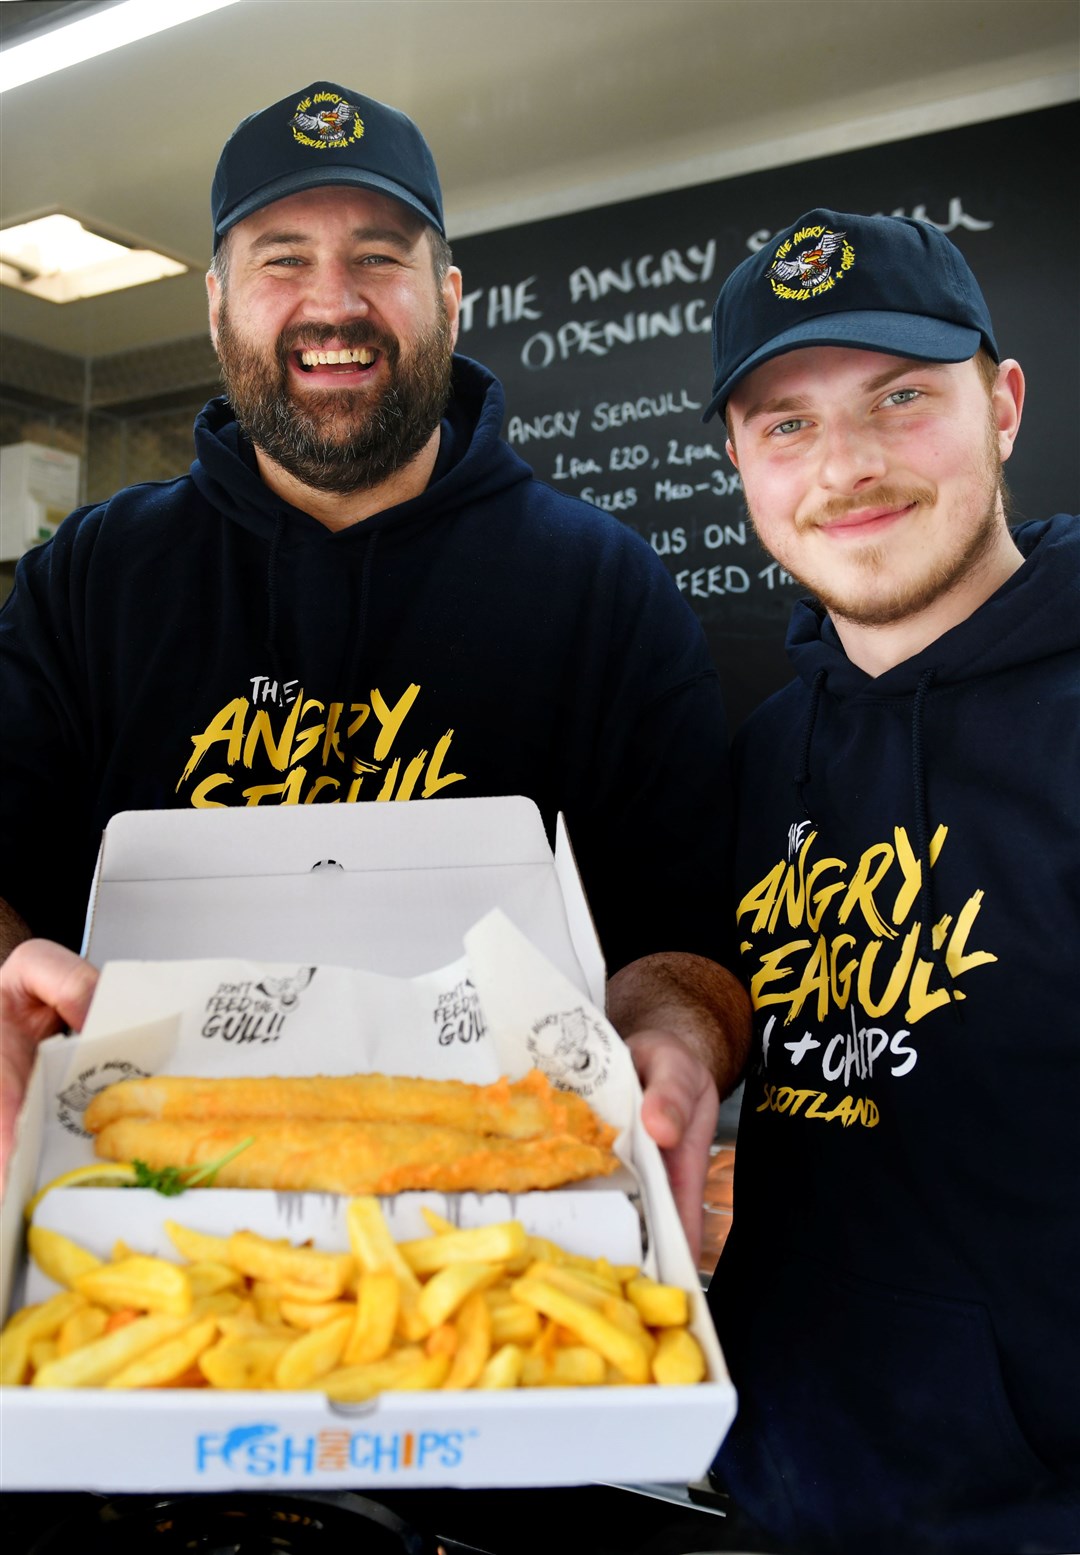 Grant Macnicol and Dan Lynch, of The Angry Seagull Fish and Chips.